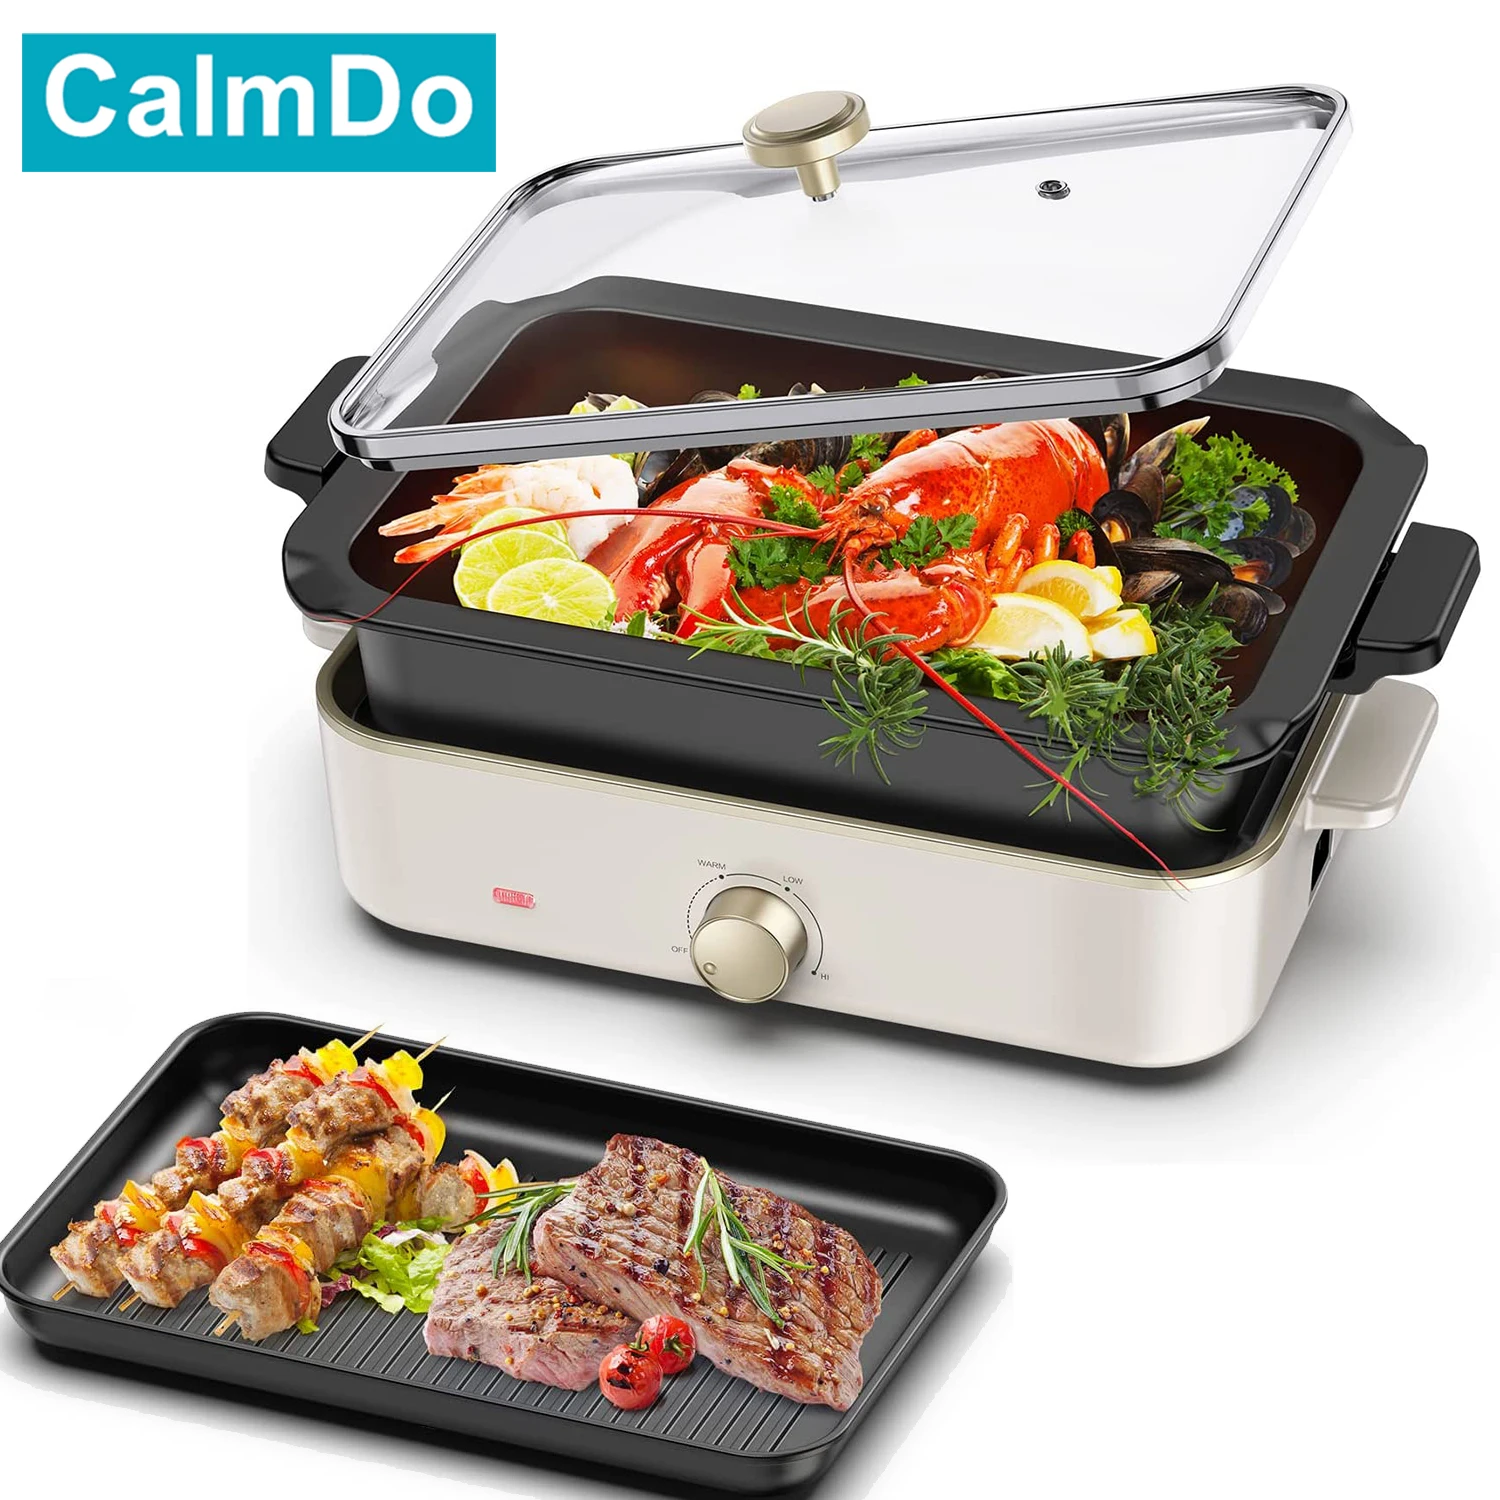 CalmDo 1400W 3 in 1 Electric Pan, Multi-functional Skillet Slow Cookers Non-stick Coating Meats Seafood Steak Pancake Griddle